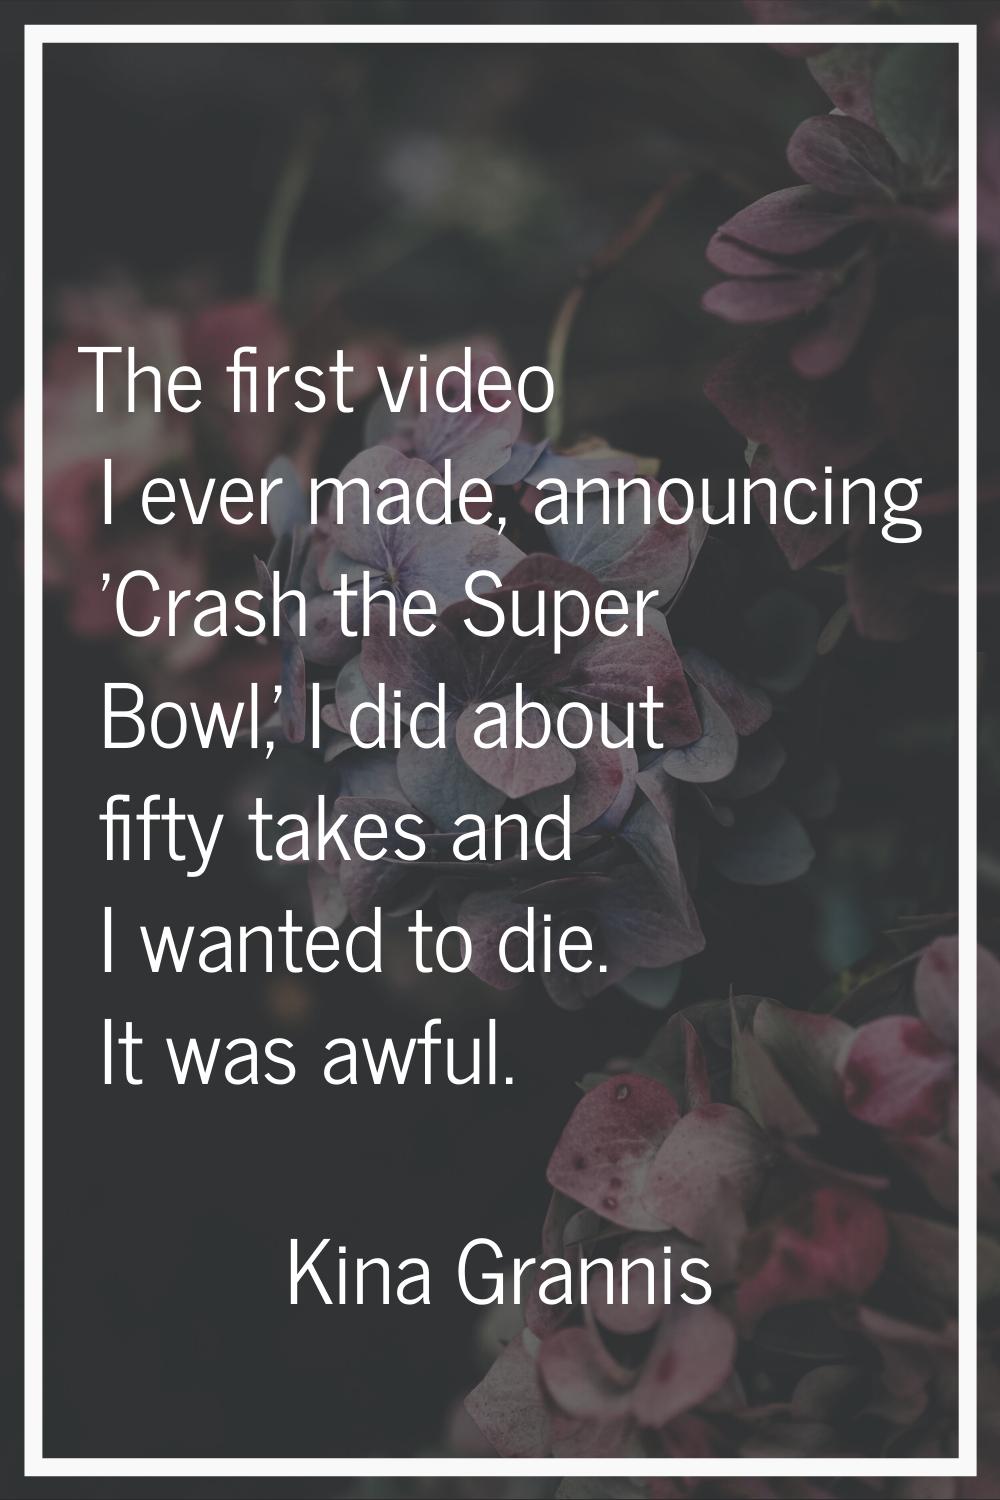 The first video I ever made, announcing 'Crash the Super Bowl,' I did about fifty takes and I wante